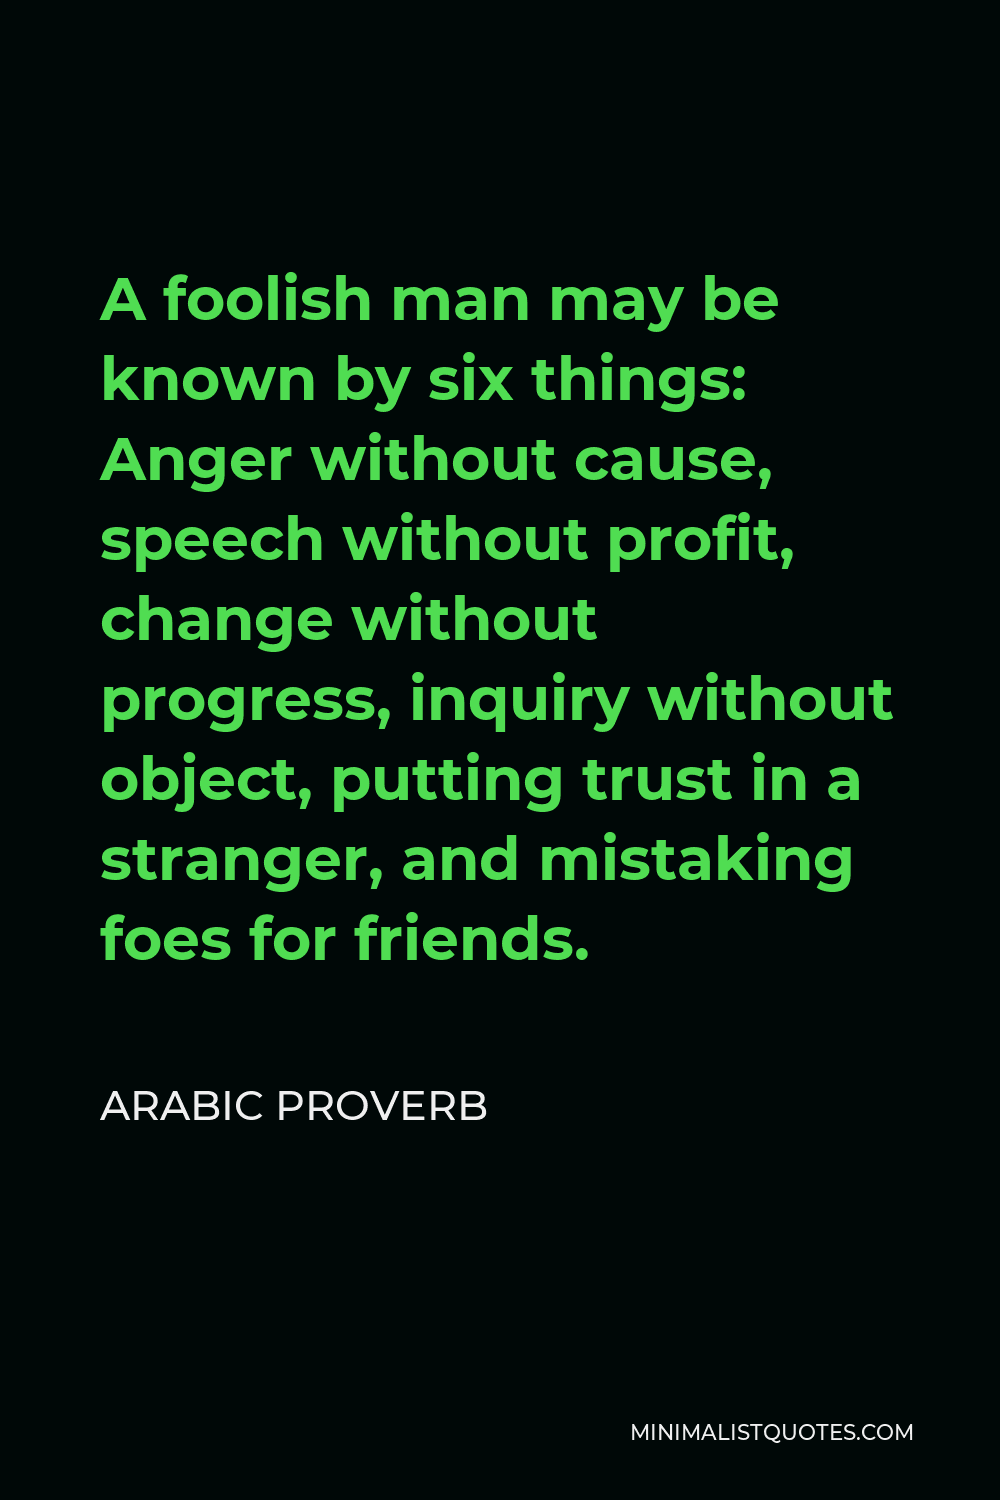 Arabic Proverb Quote - A foolish man may be known by six things: Anger without cause, speech without profit, change without progress, inquiry without object, putting trust in a stranger, and mistaking foes for friends.